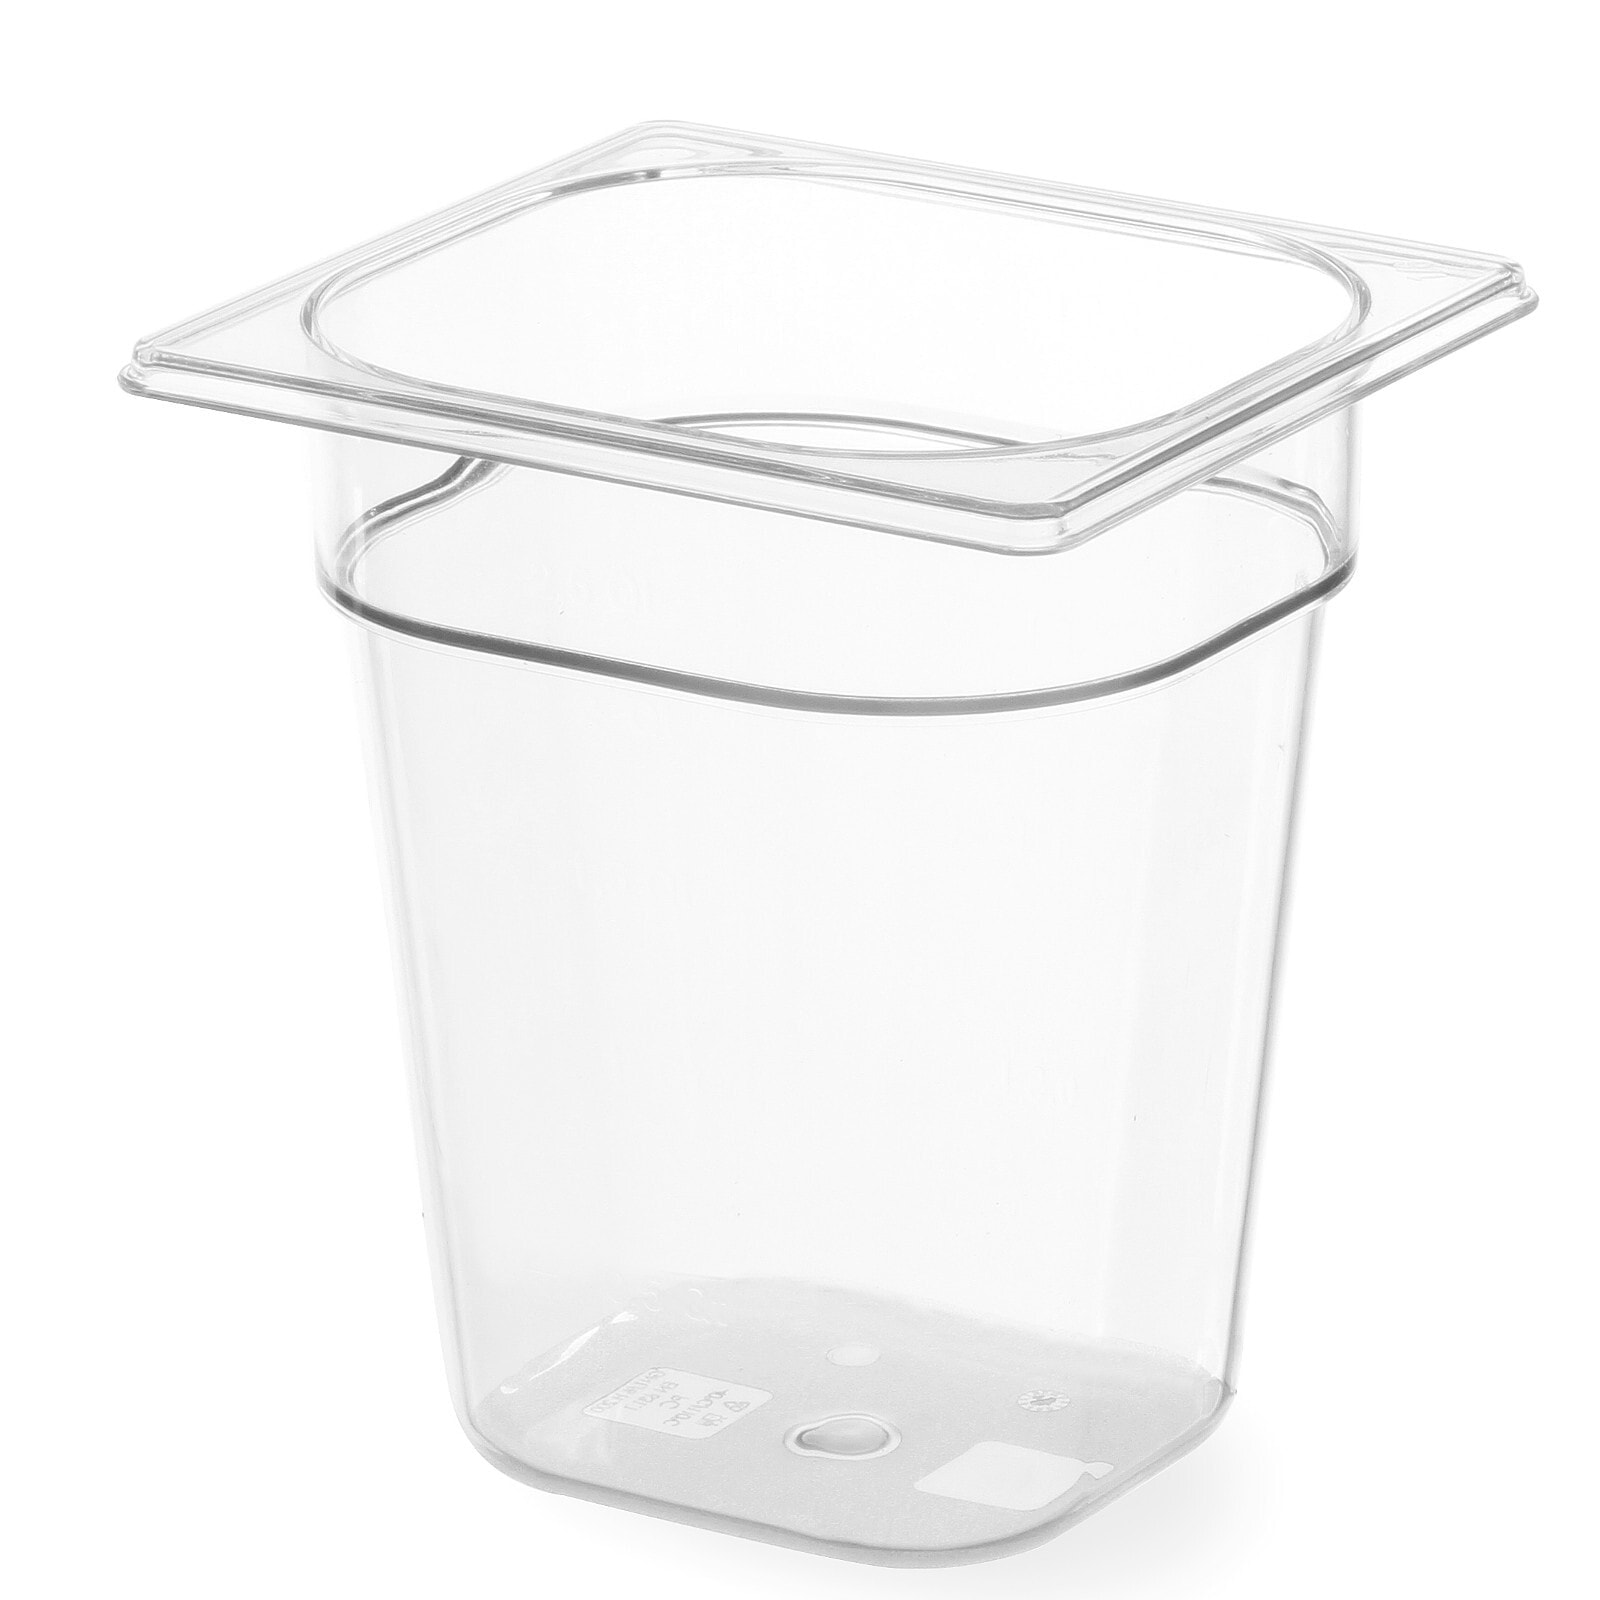 GN container transparent, polycarbonate GN 1/6, height 200 mm - Hendi 861707